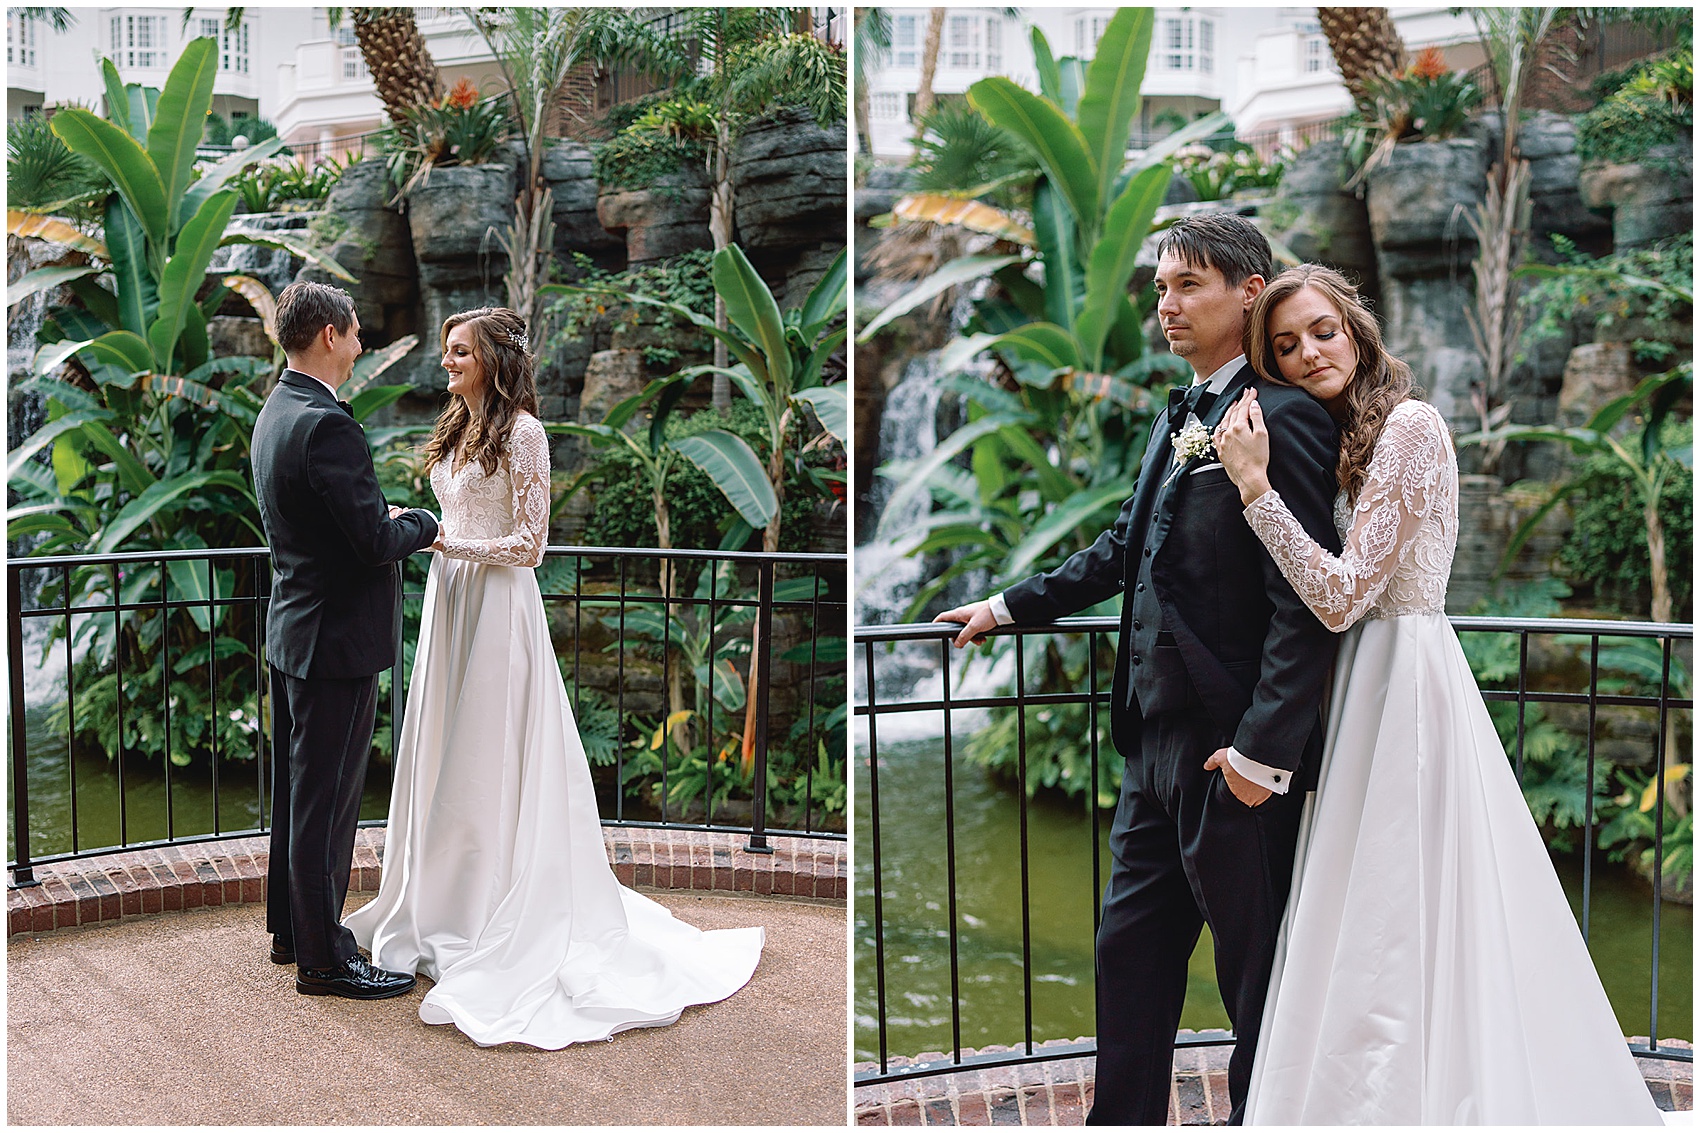 A bride rests on the shoulder of her groom in a white lace embroidered dress and him in a black tuxedo in a tropical garden